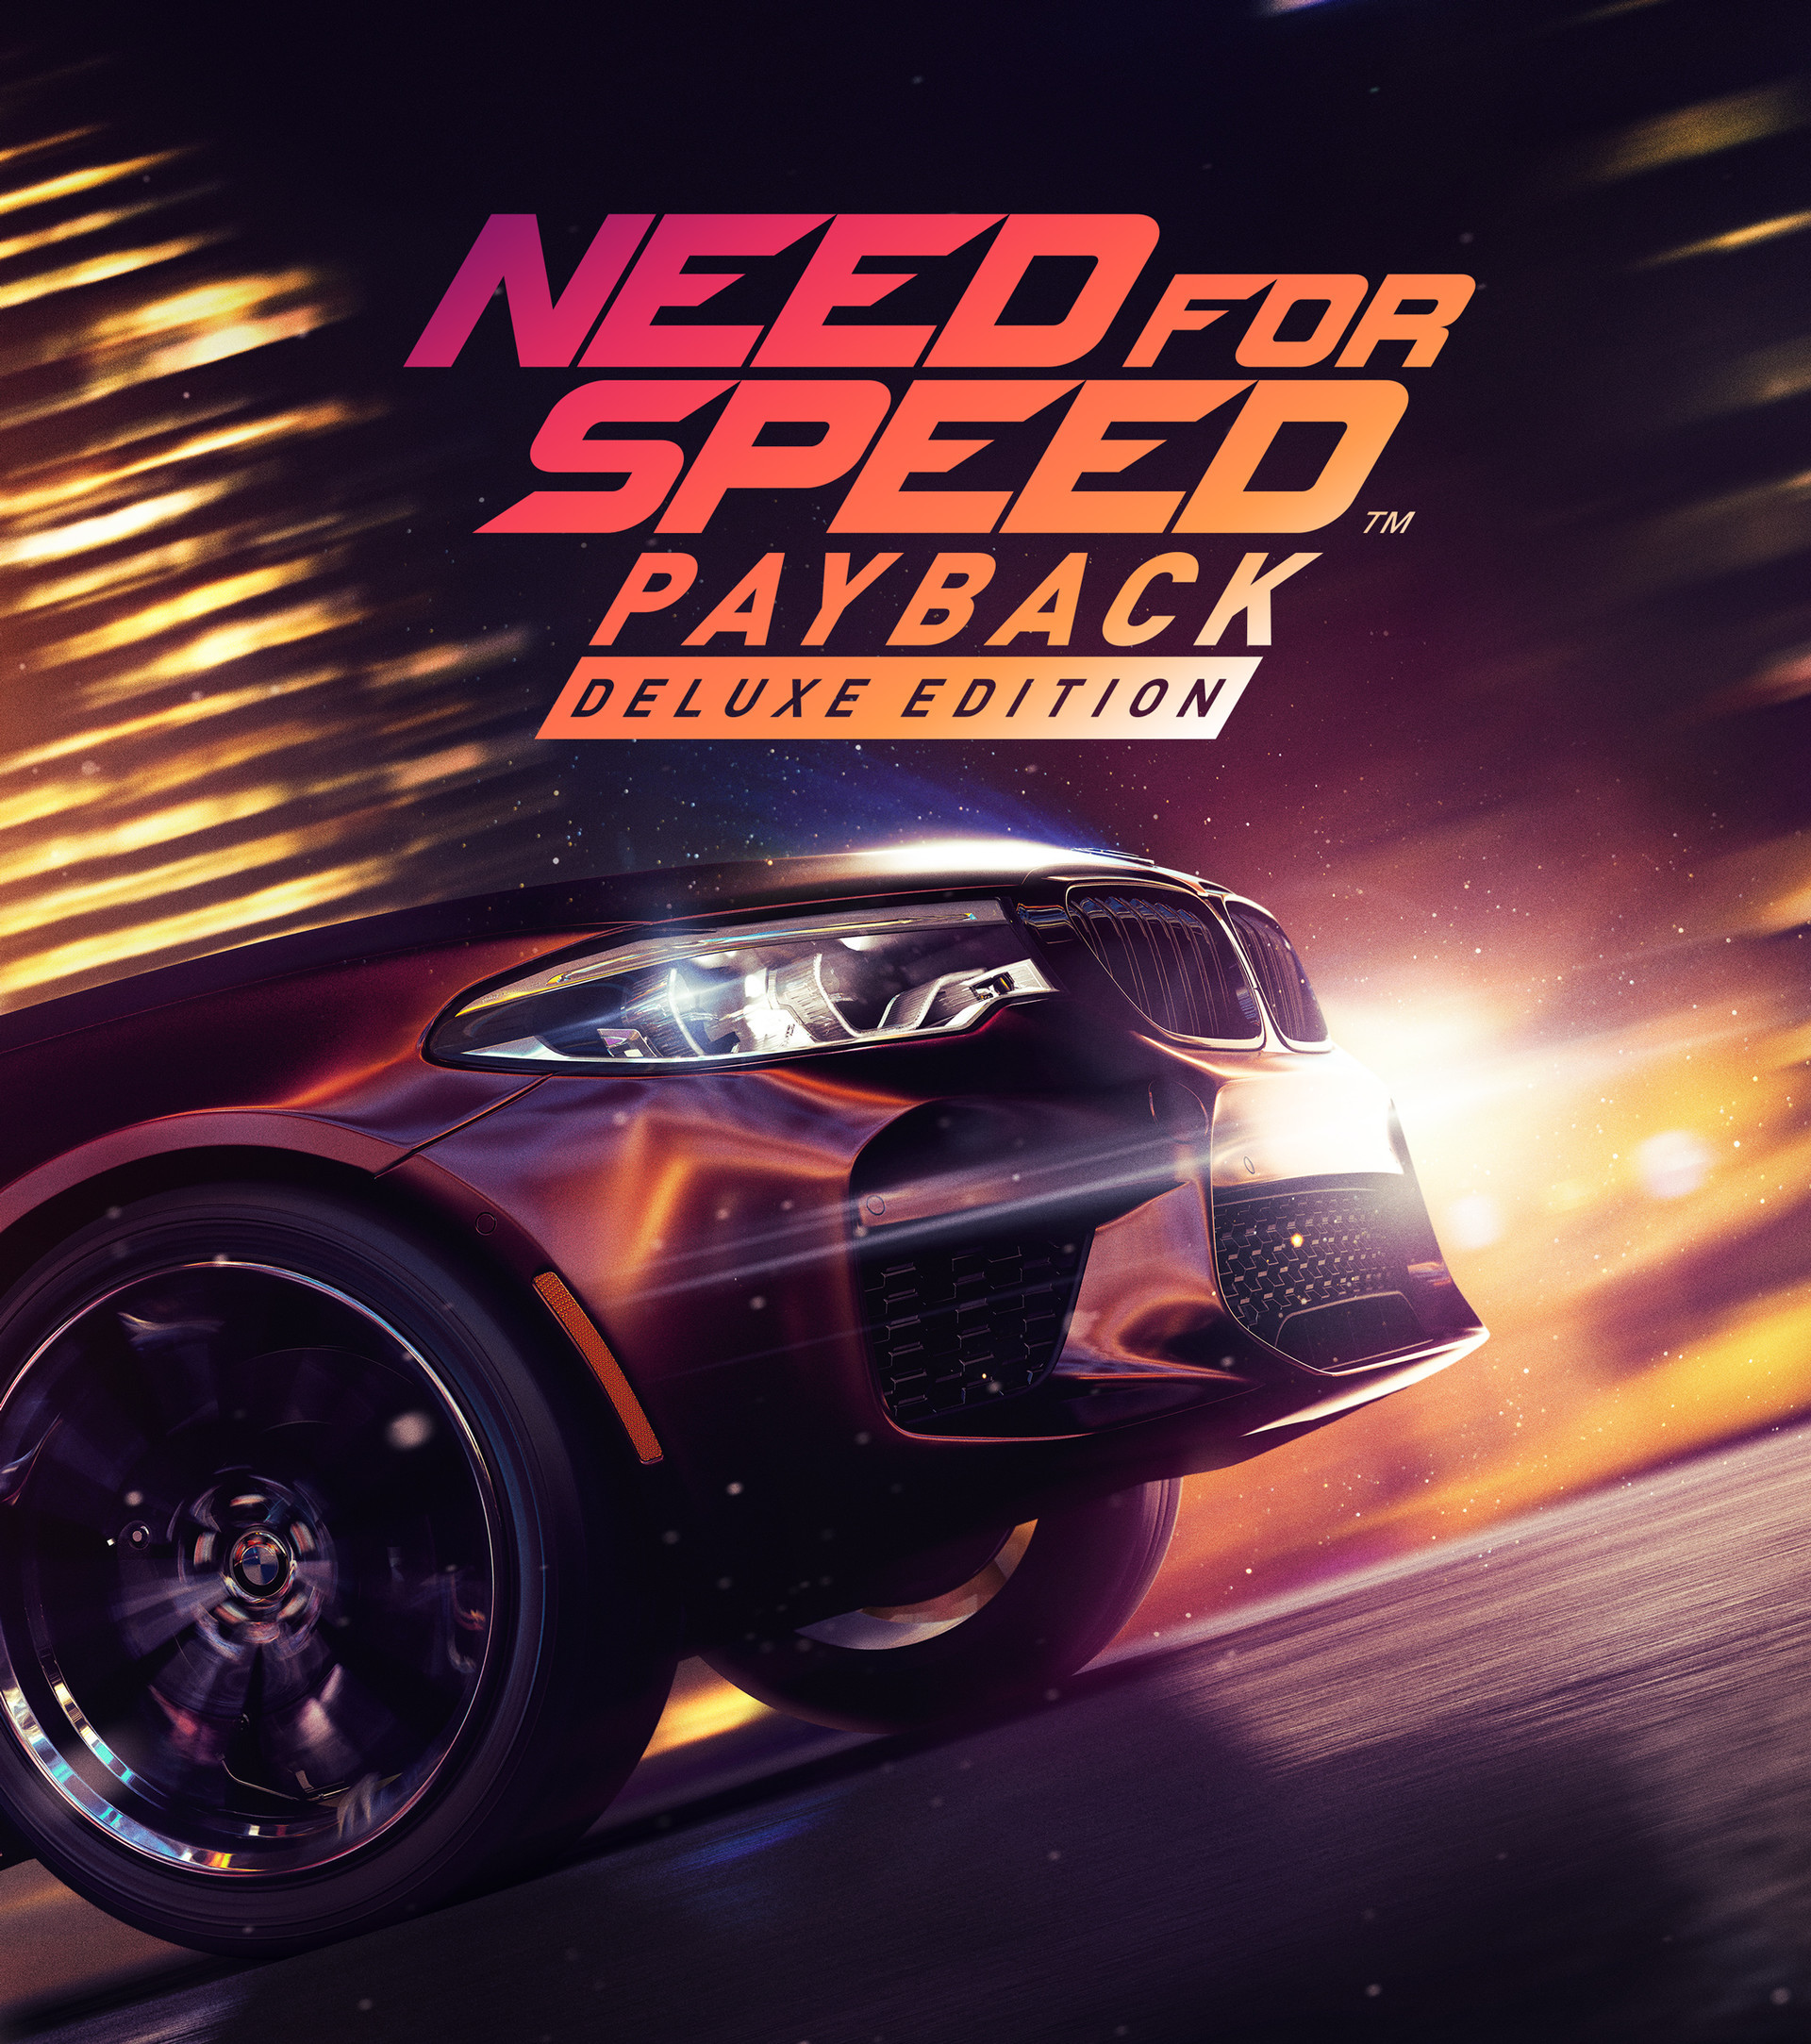 Need for speed playback. Need for Speed Payback Deluxe Edition. BMW m5 NFS. Need for Speed пайбэк.